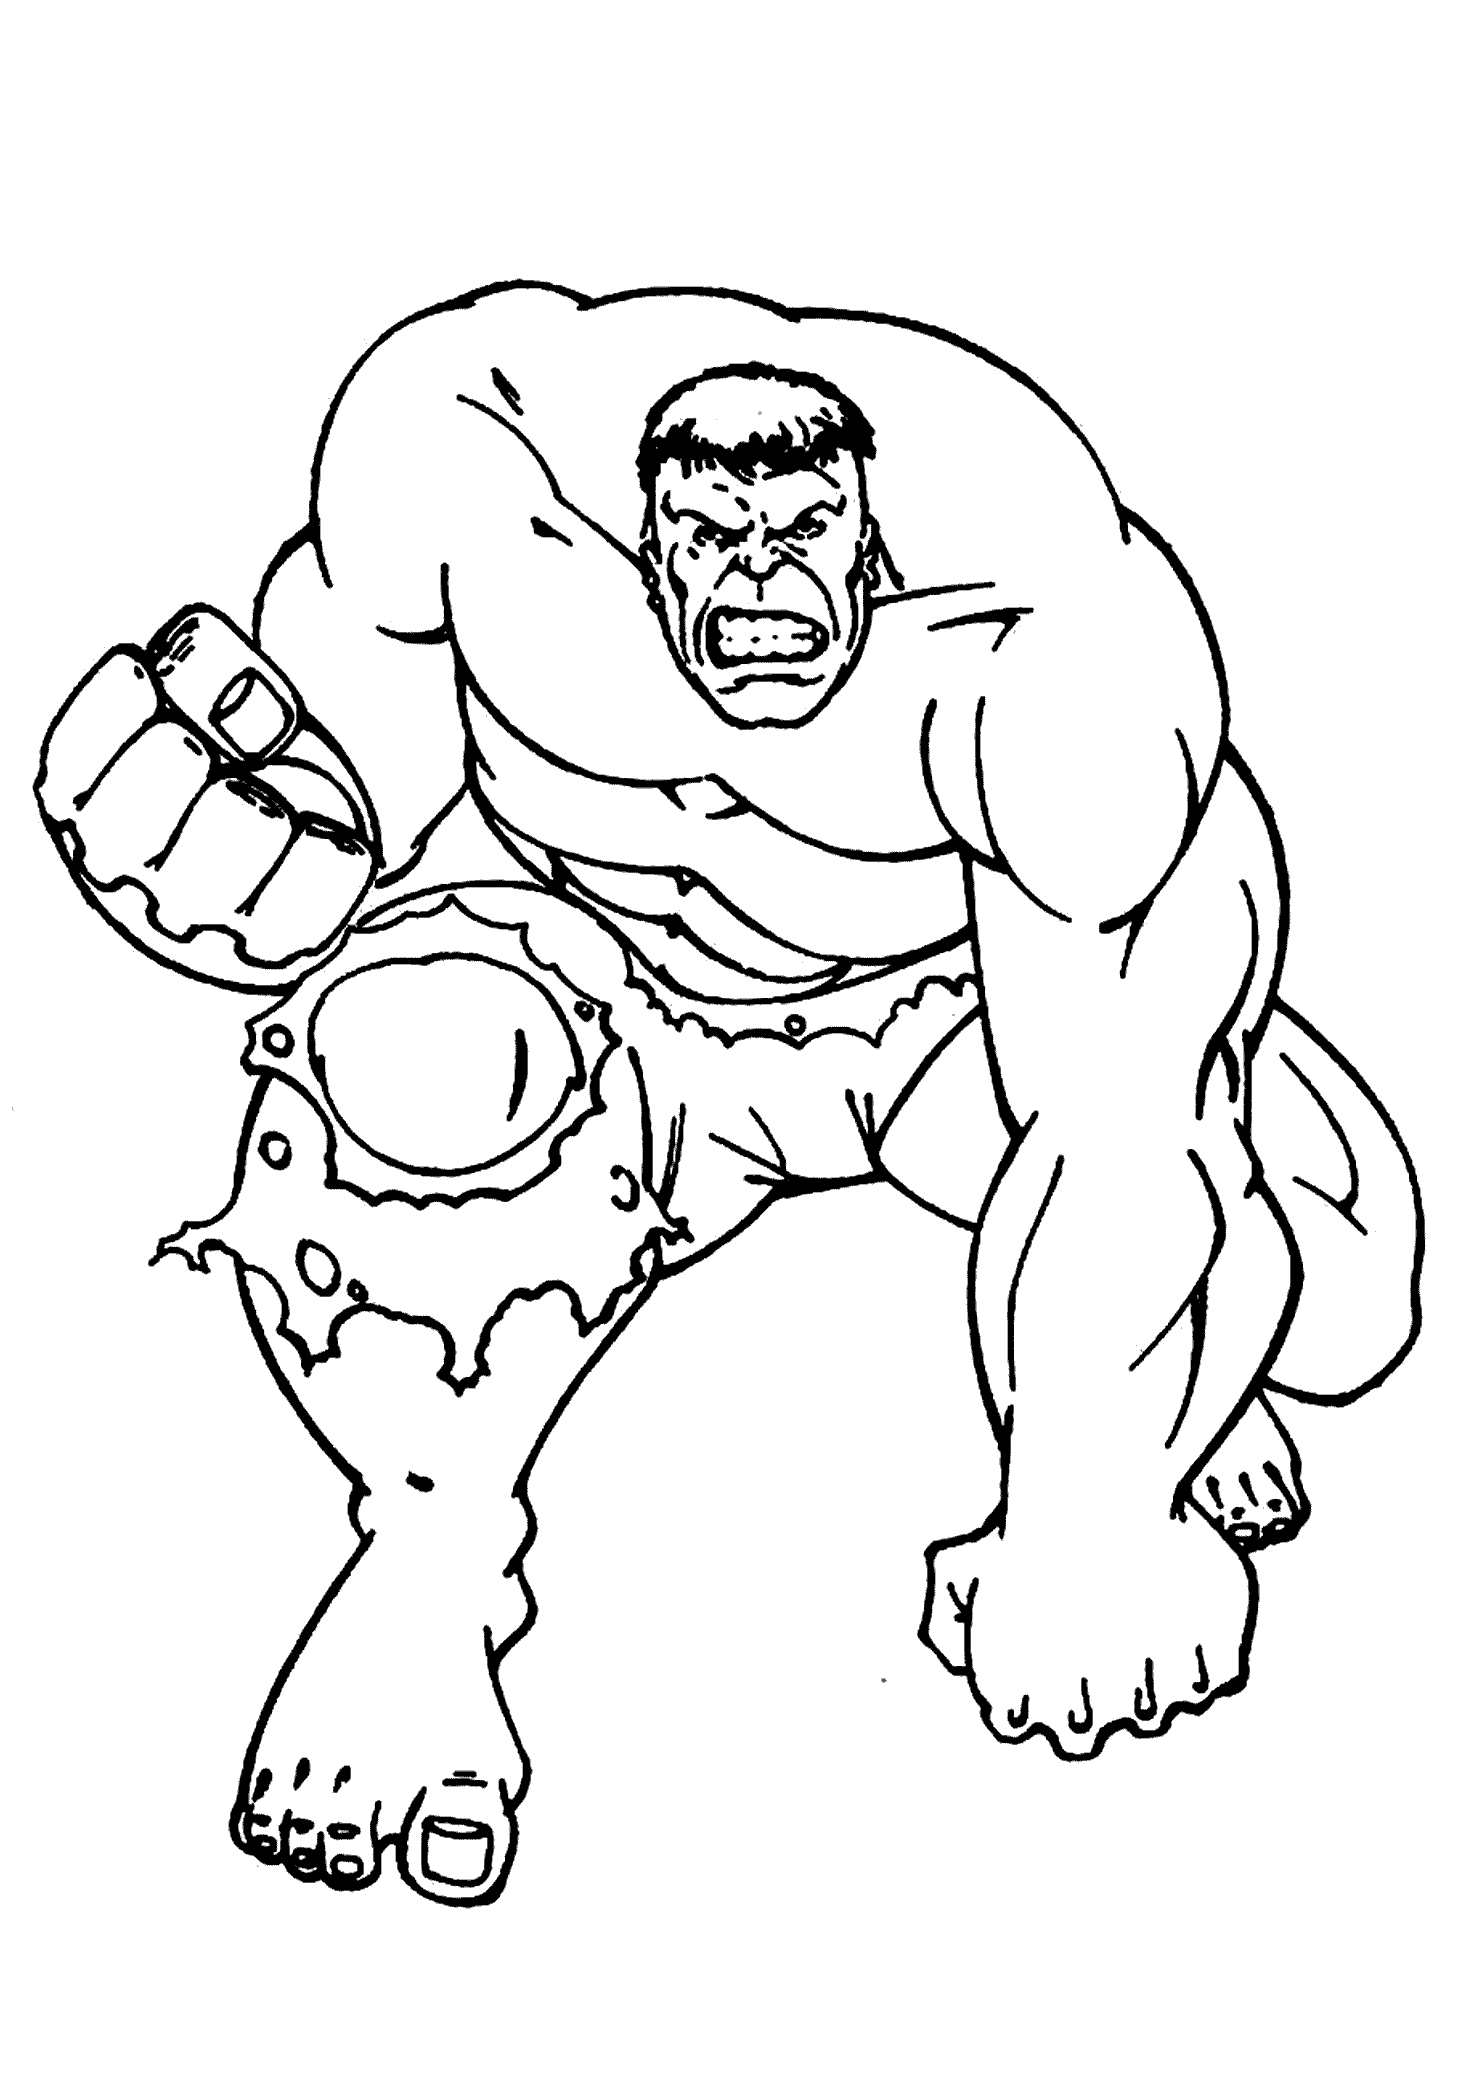 hulk coloring pages to print free free printable hulk coloring pages for kids cool2bkids coloring print pages to free hulk 